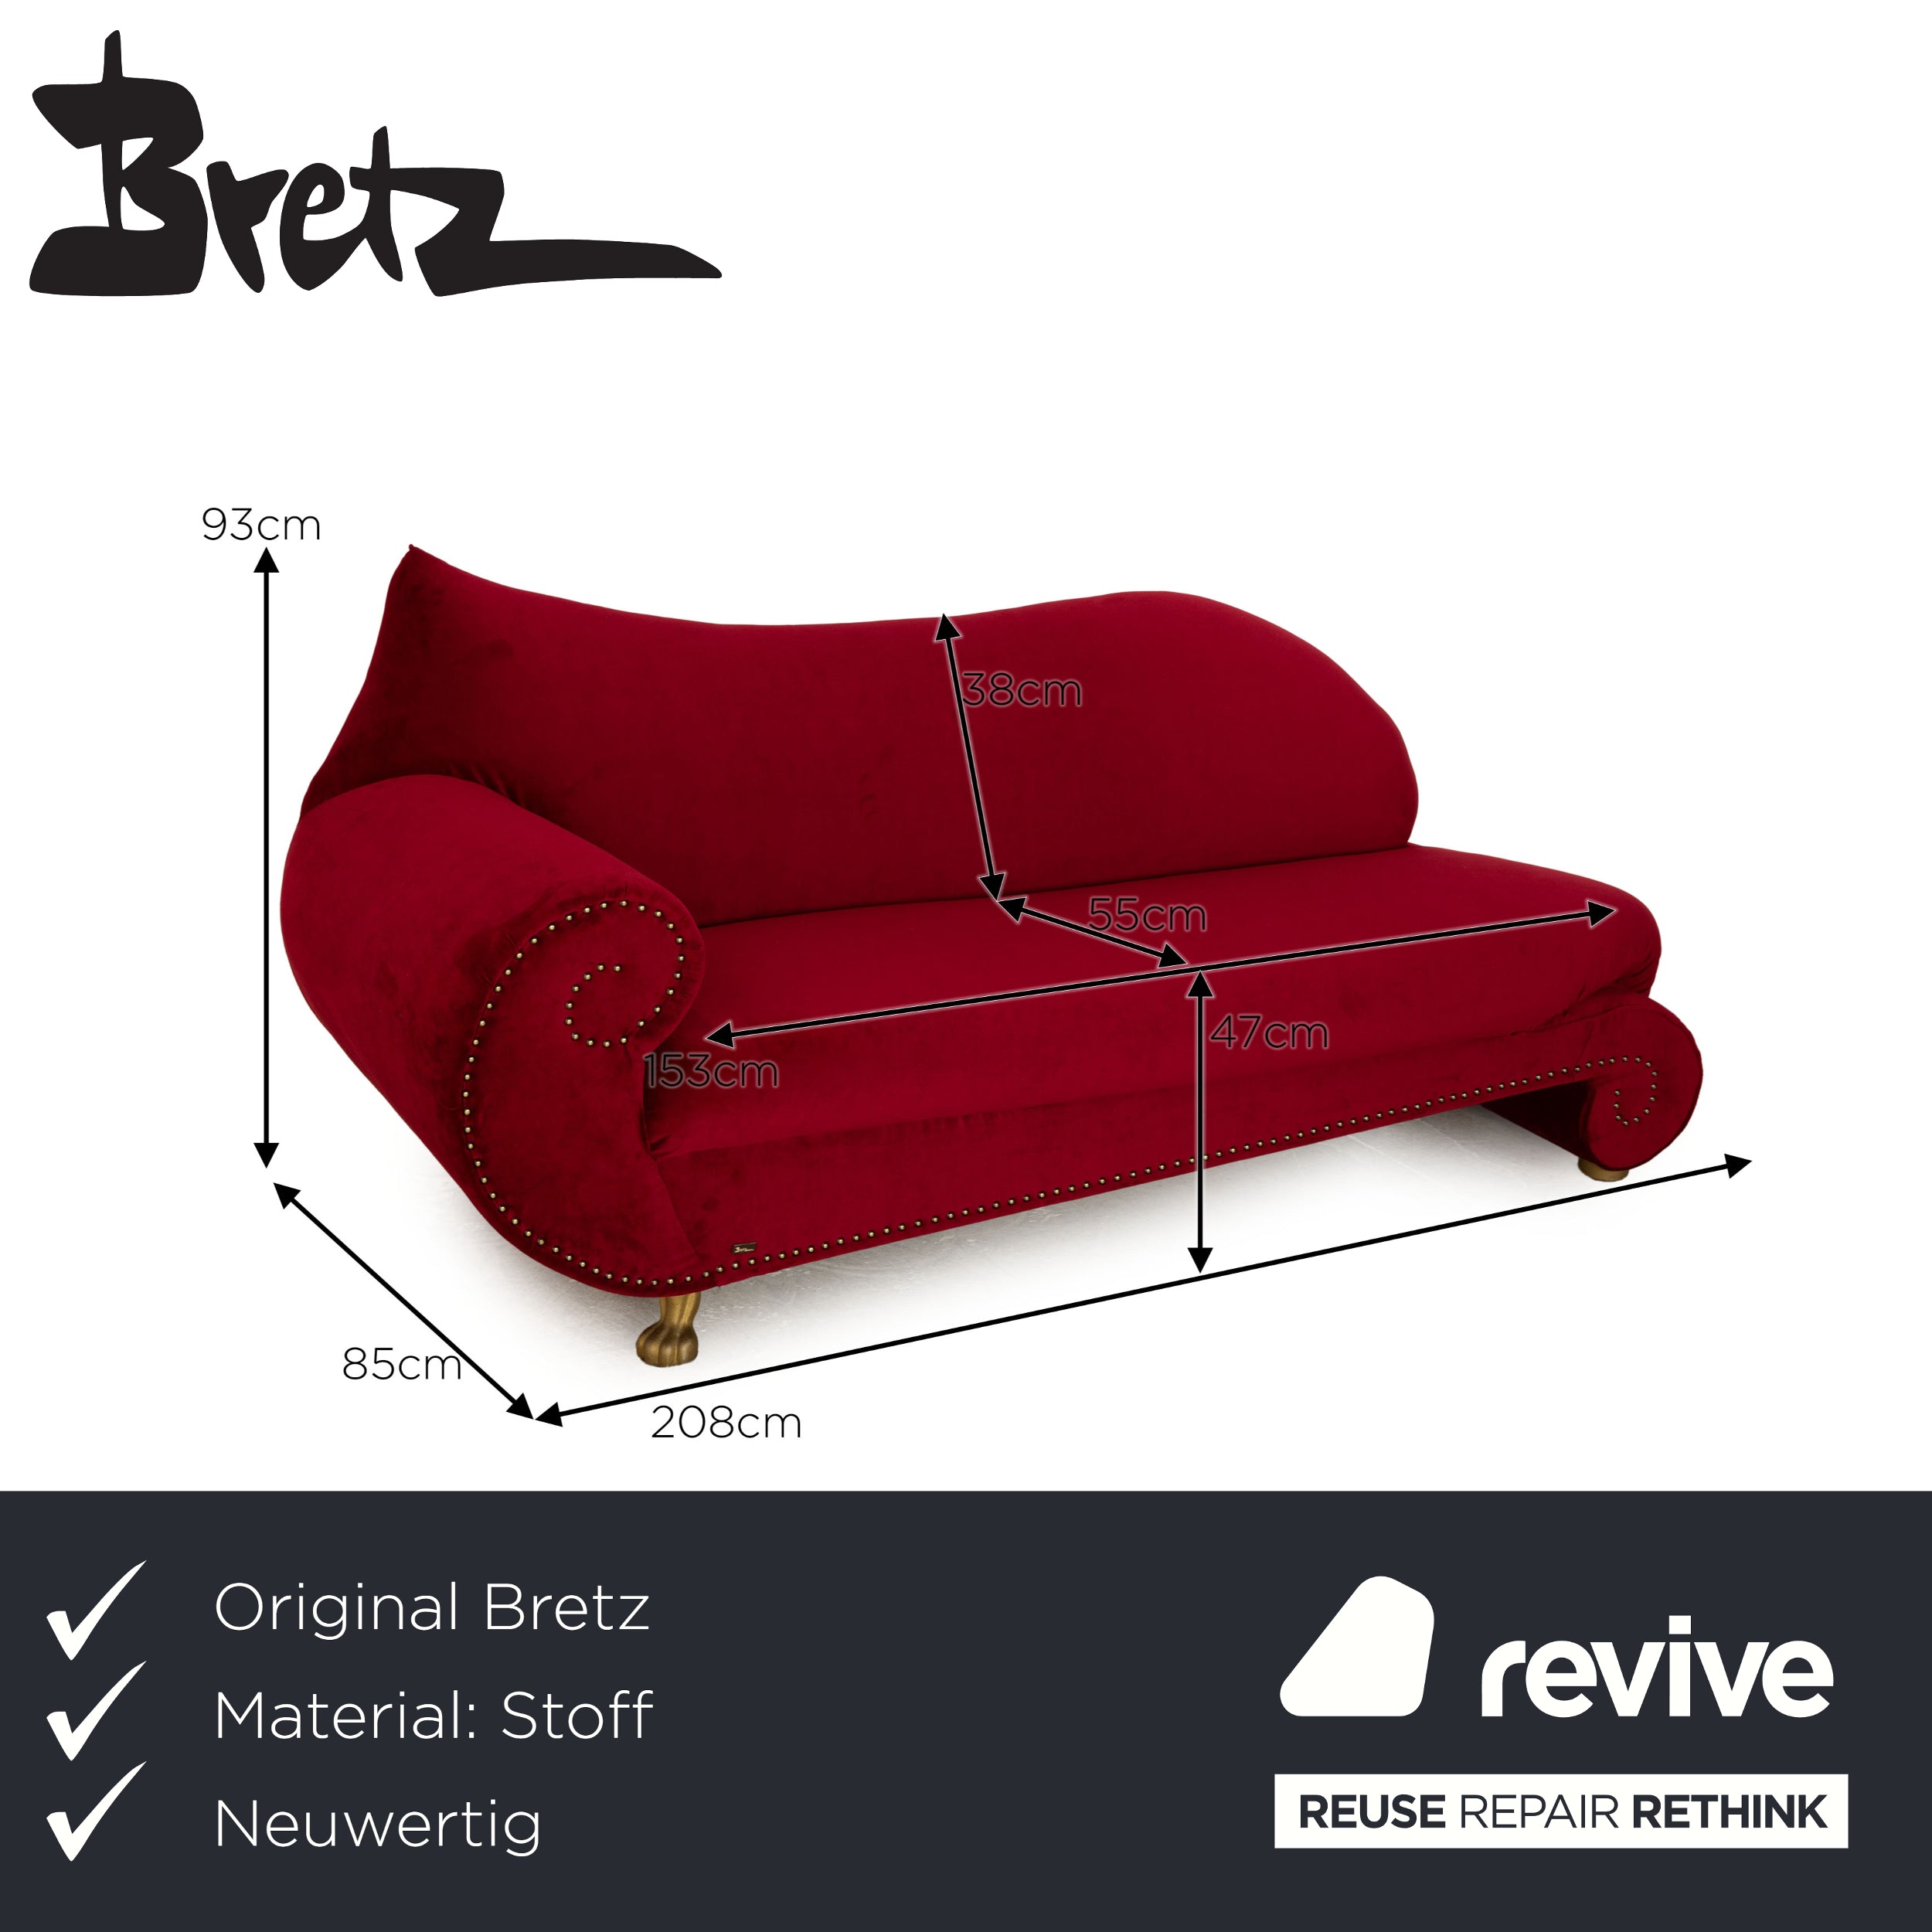 Bretz Gaudi fabric three-seater chaise longue red sofa couch reupholstered